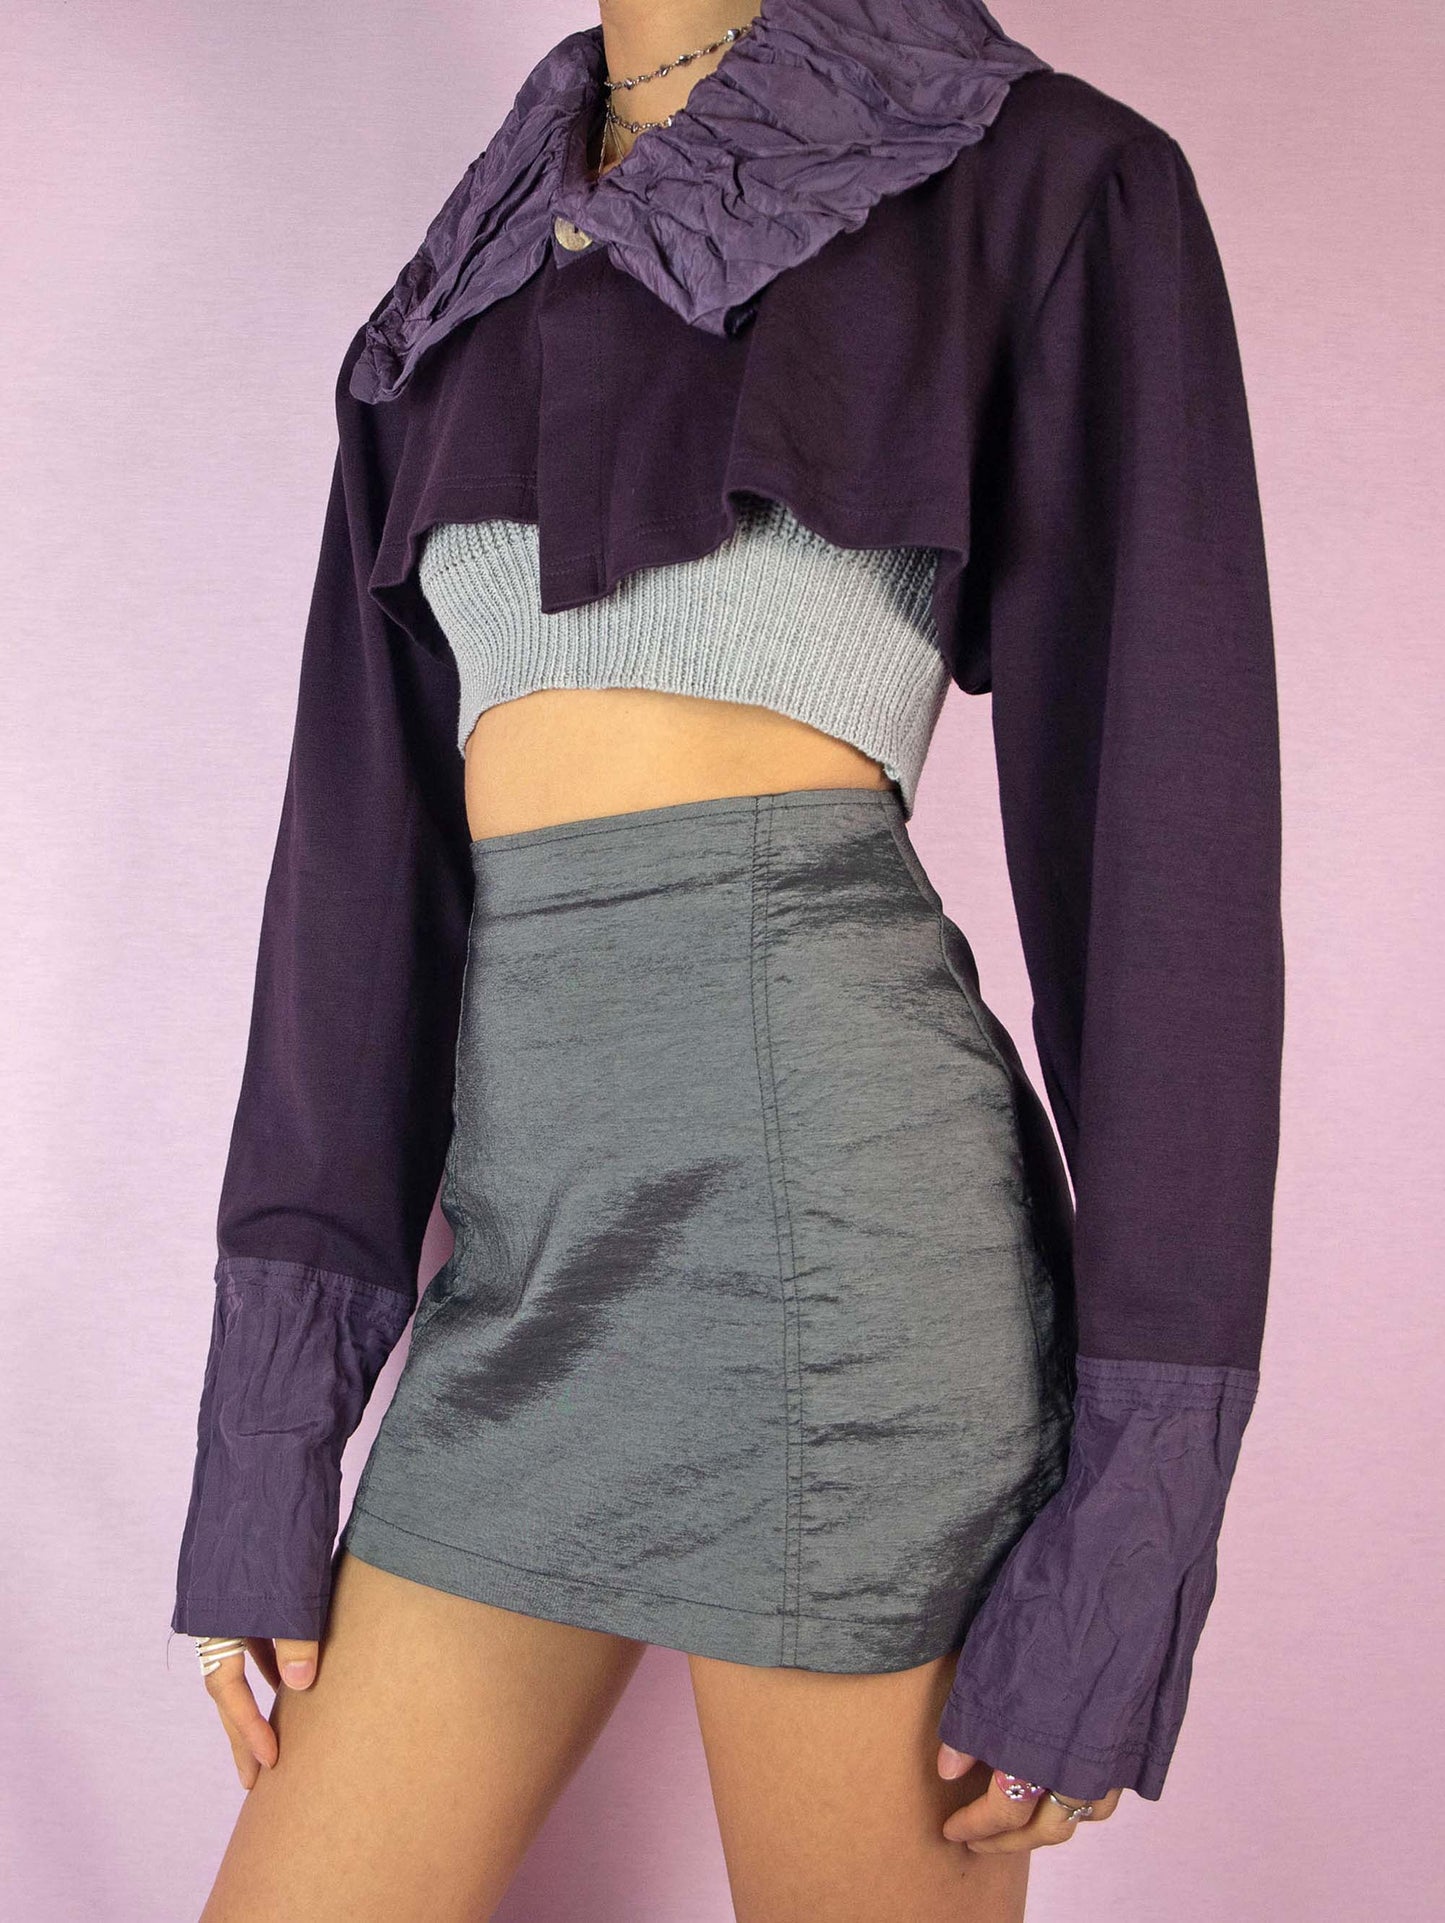 The Y2K Dark Purple Bolero Jacket is a vintage 2000s deconstructed subversive avant-garde party cropped jacket featuring a collar and a one-button closure. Made in Italy.